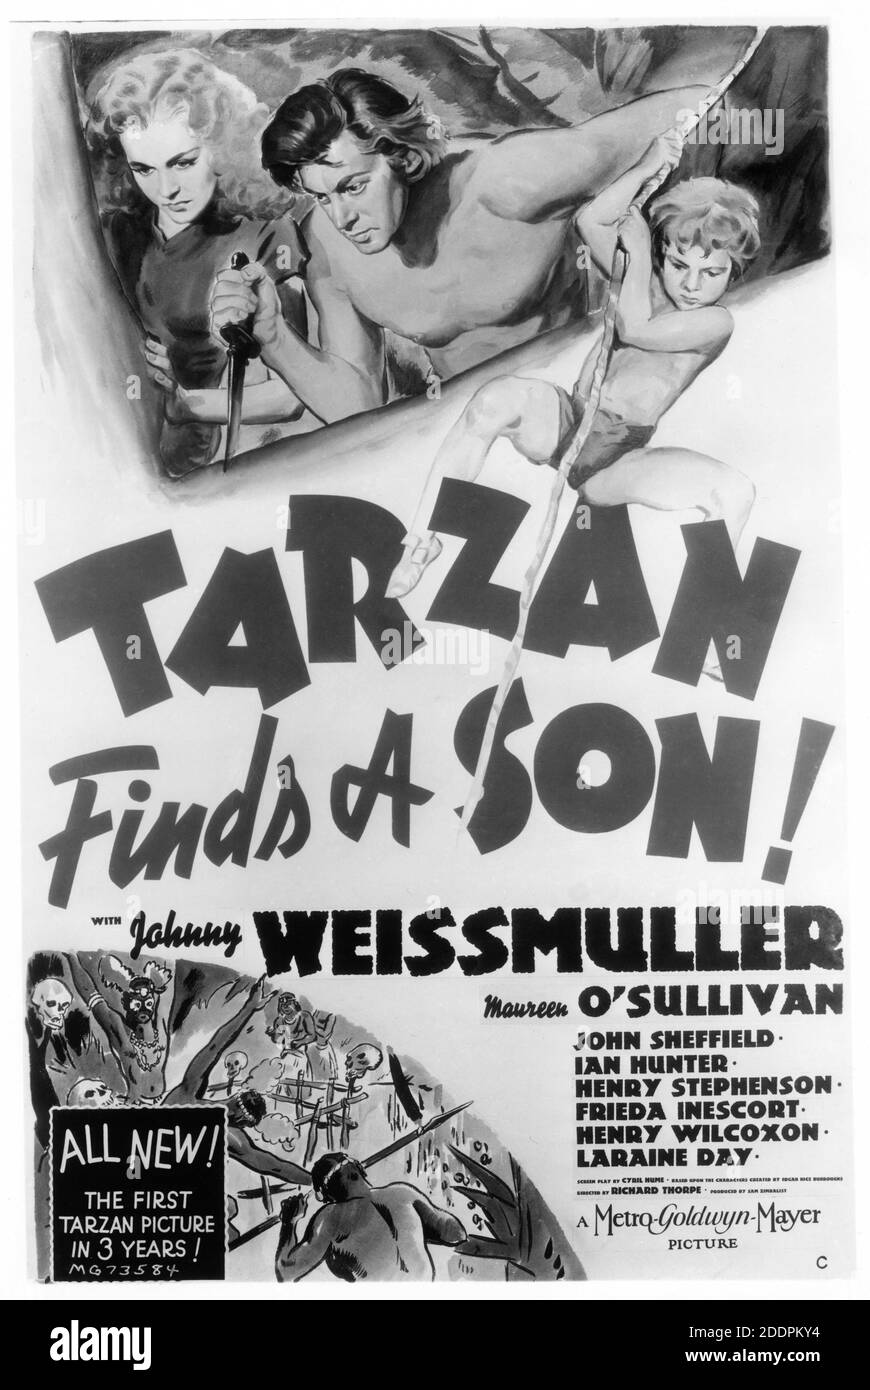 JOHNNY WEISSMULLER MAUREEN O'SULLIVAN and JOHN SHEFFIELD in TARZAN FINDS A SON ! 1939 director RICHARD THORPE screenplay Cyril Hume based on characters created by Edgar Rice Burroughs Metro Goldwyn Mayer Stock Photo